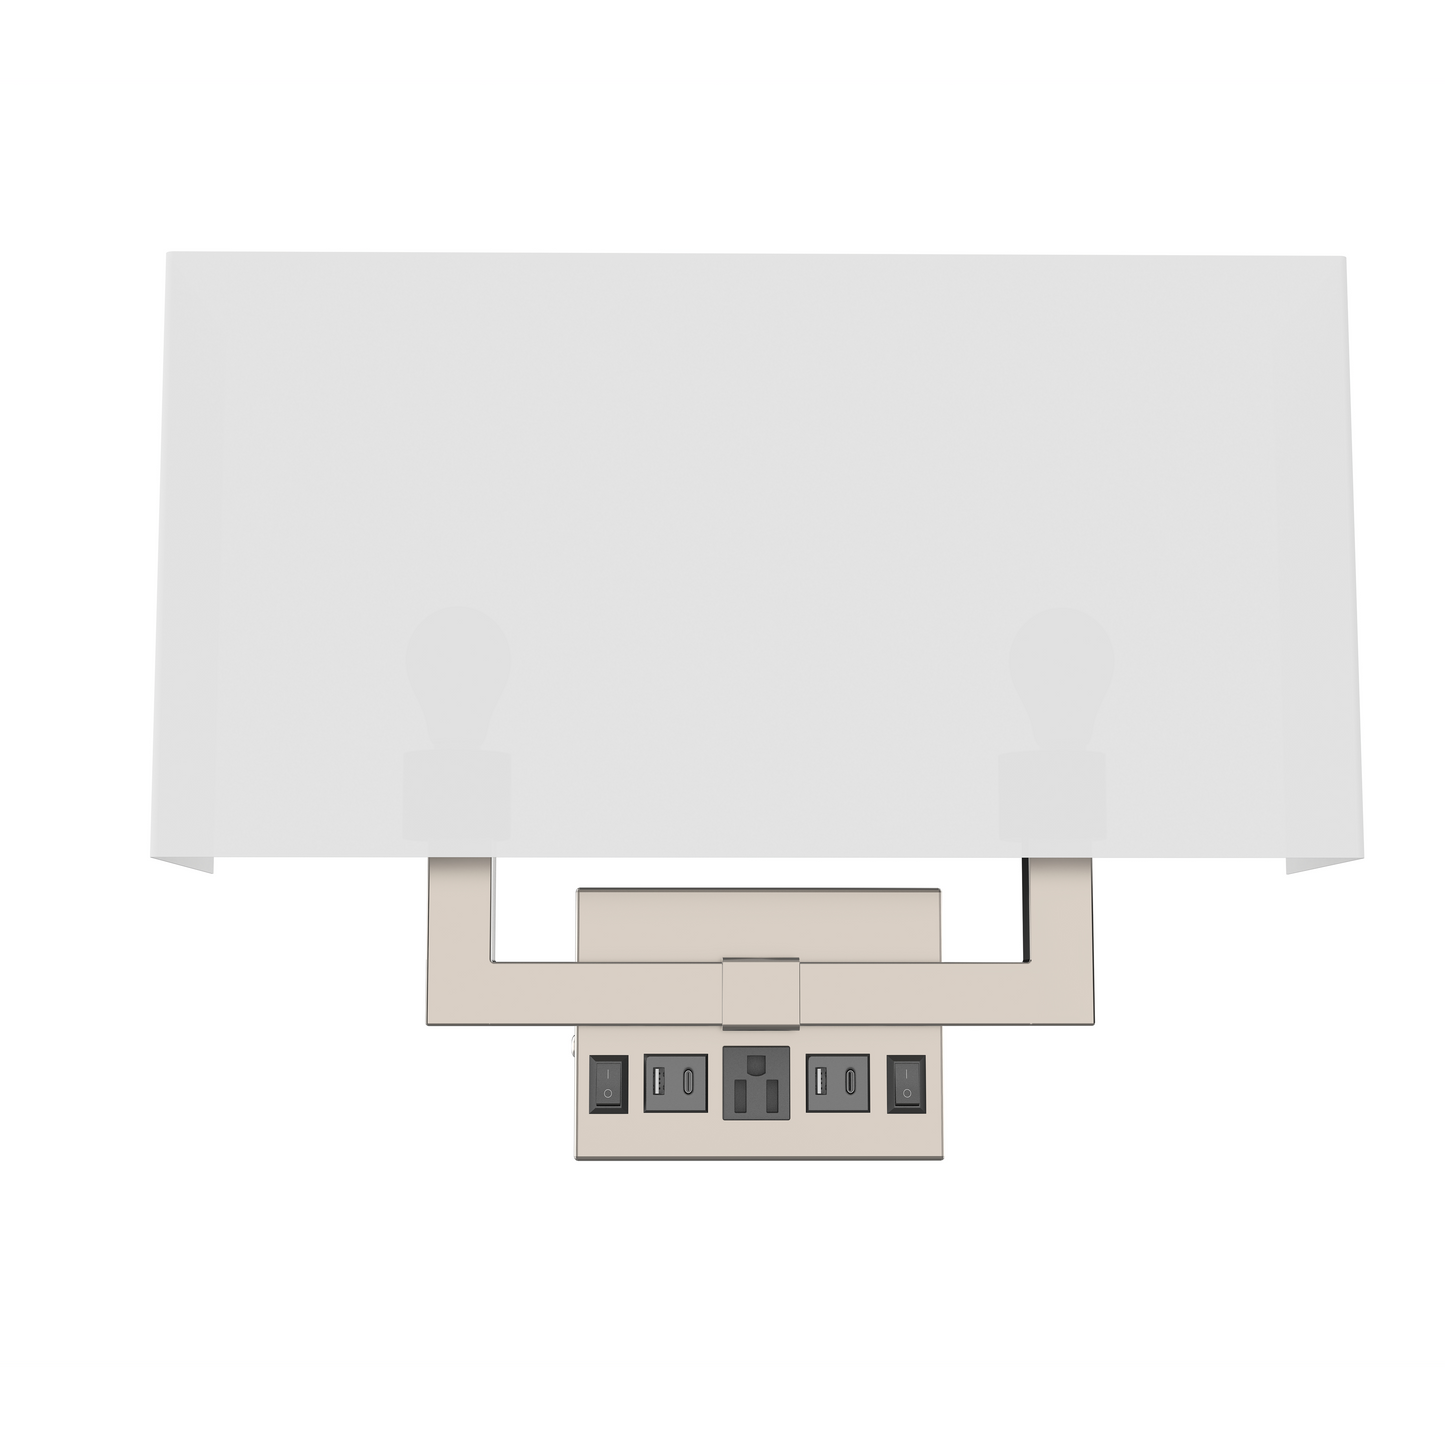 2-Light, Wall Sconce for Bedroom with 2 Switch, 2 USB, 2 Type C & 1 Outlet, White Fabric / Acrylic Shade, Wall Mounted Lamps for Hotel, Corridor and Restaurant